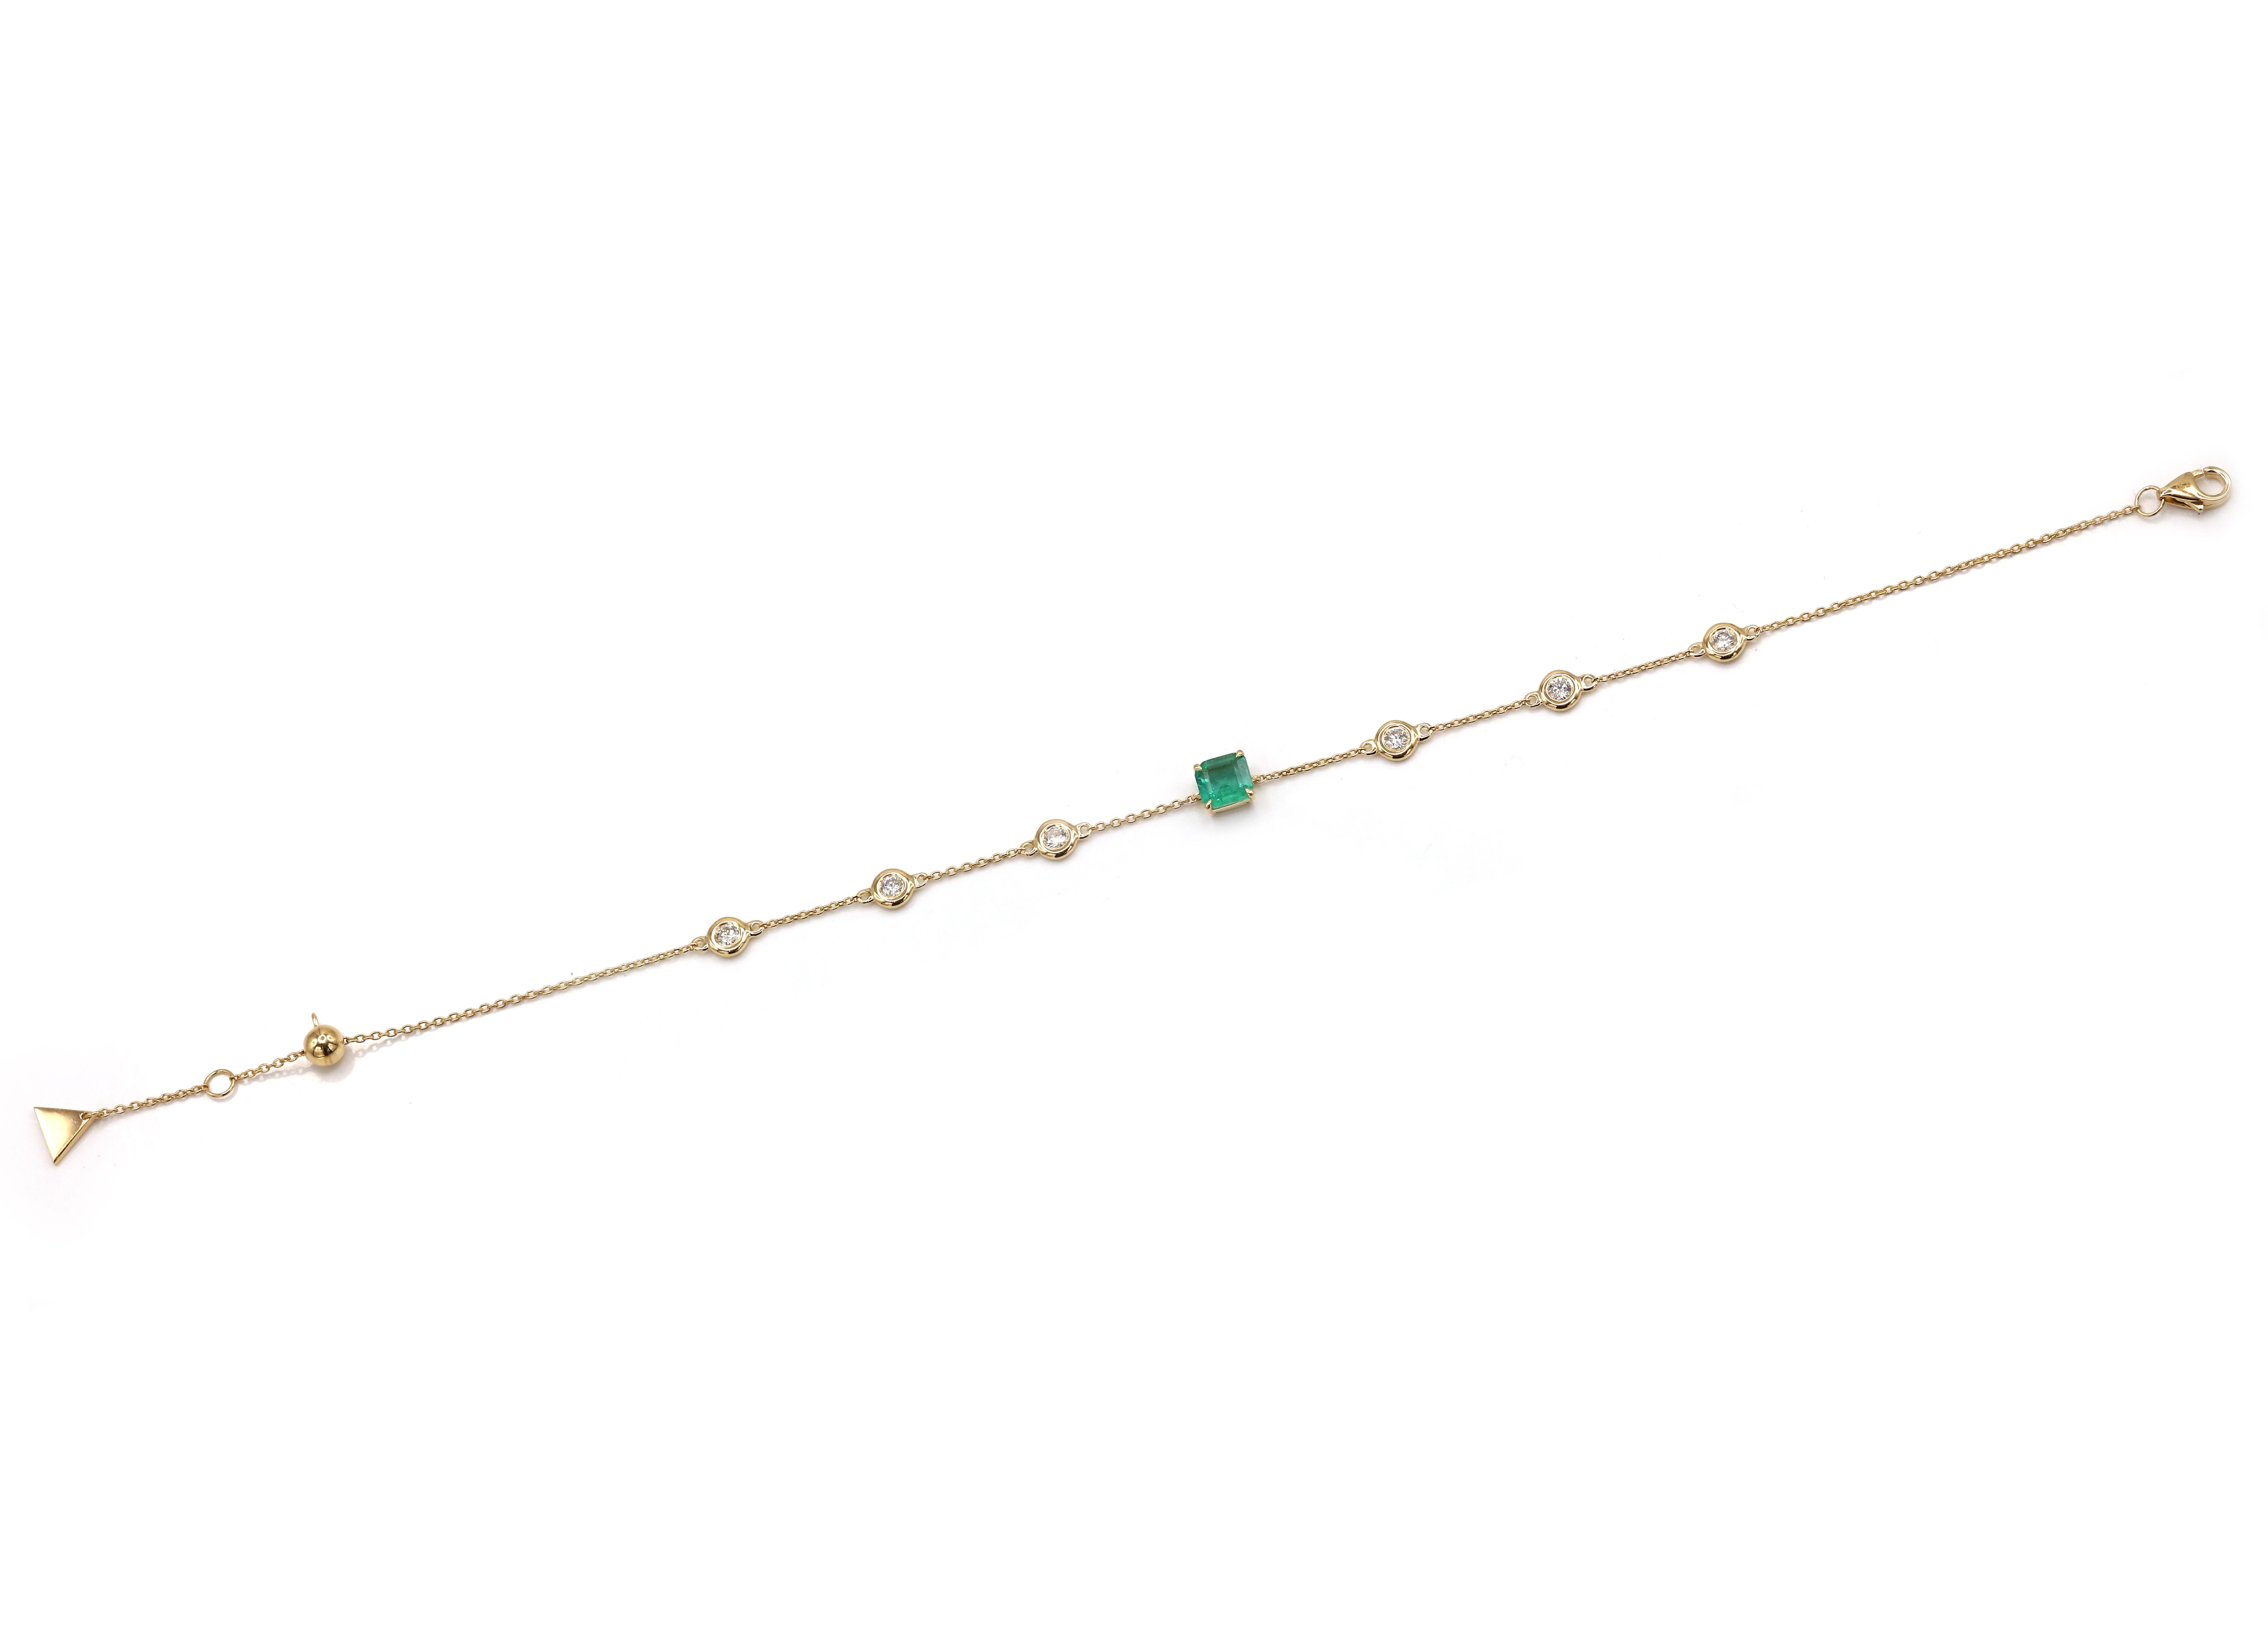 Drawing inspiration from nature, love and color, ALPENGEM presents an 18 K yellow gold chain bracelet from our emerald collection. This fine jewelry can be worn everyday and layered to create different looks. Diamonds and emeralds are in the group